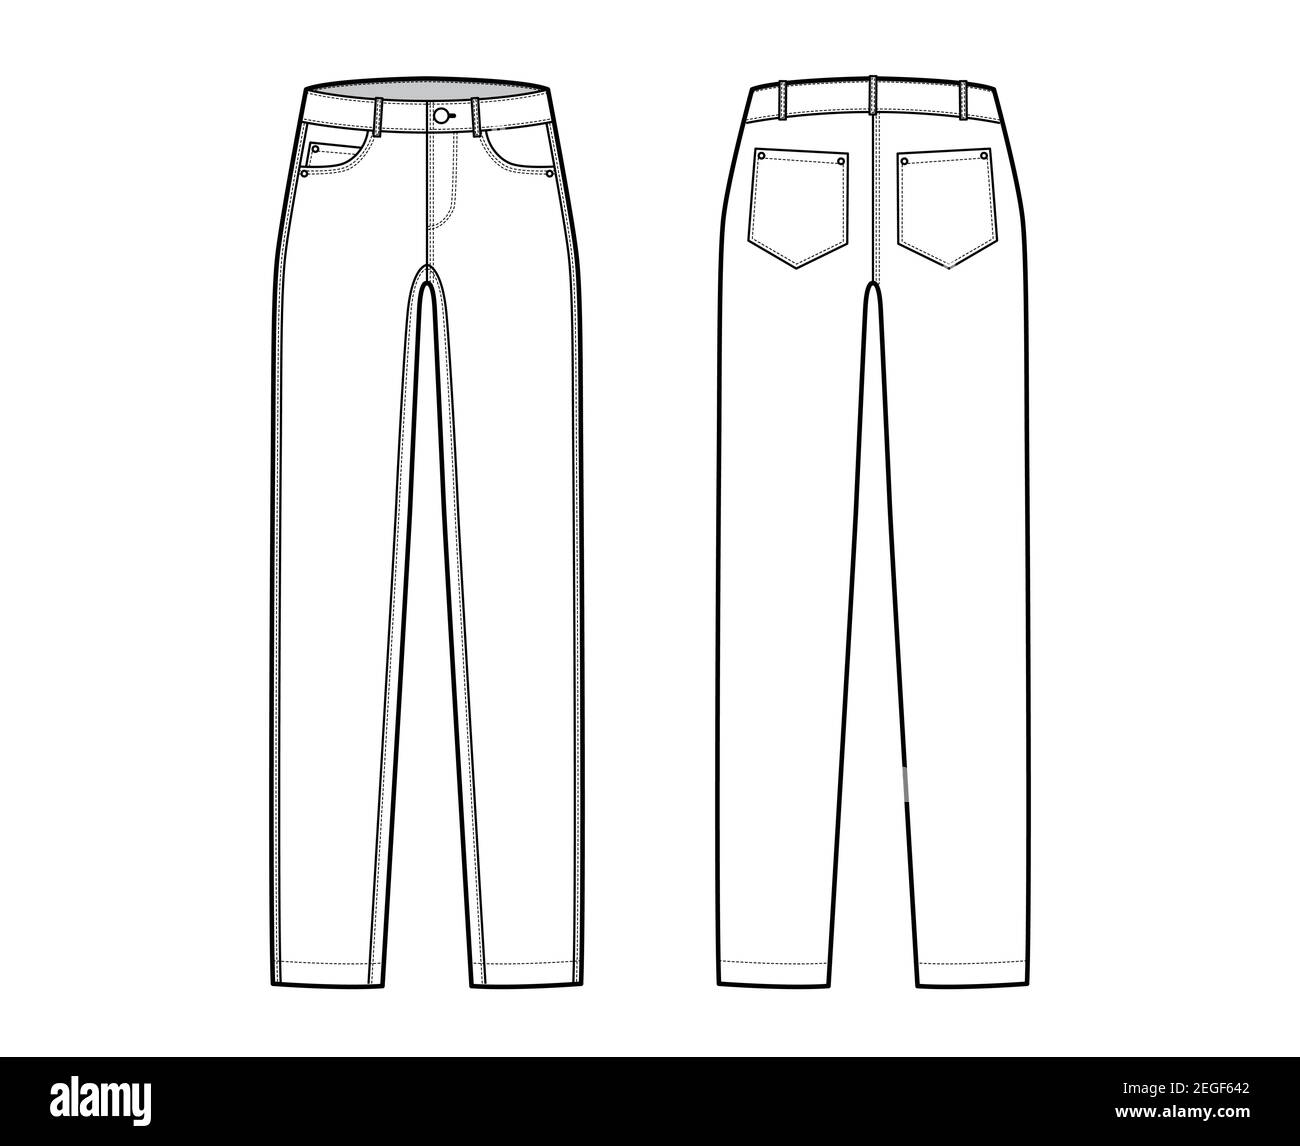 Skinny Jeans Denim pants technical fashion illustration with full length, low waist, rise, curved, angled 5 pockets, Rivets. Flat bottom template front, back, white color style. Women, men CAD mockup Stock Vector